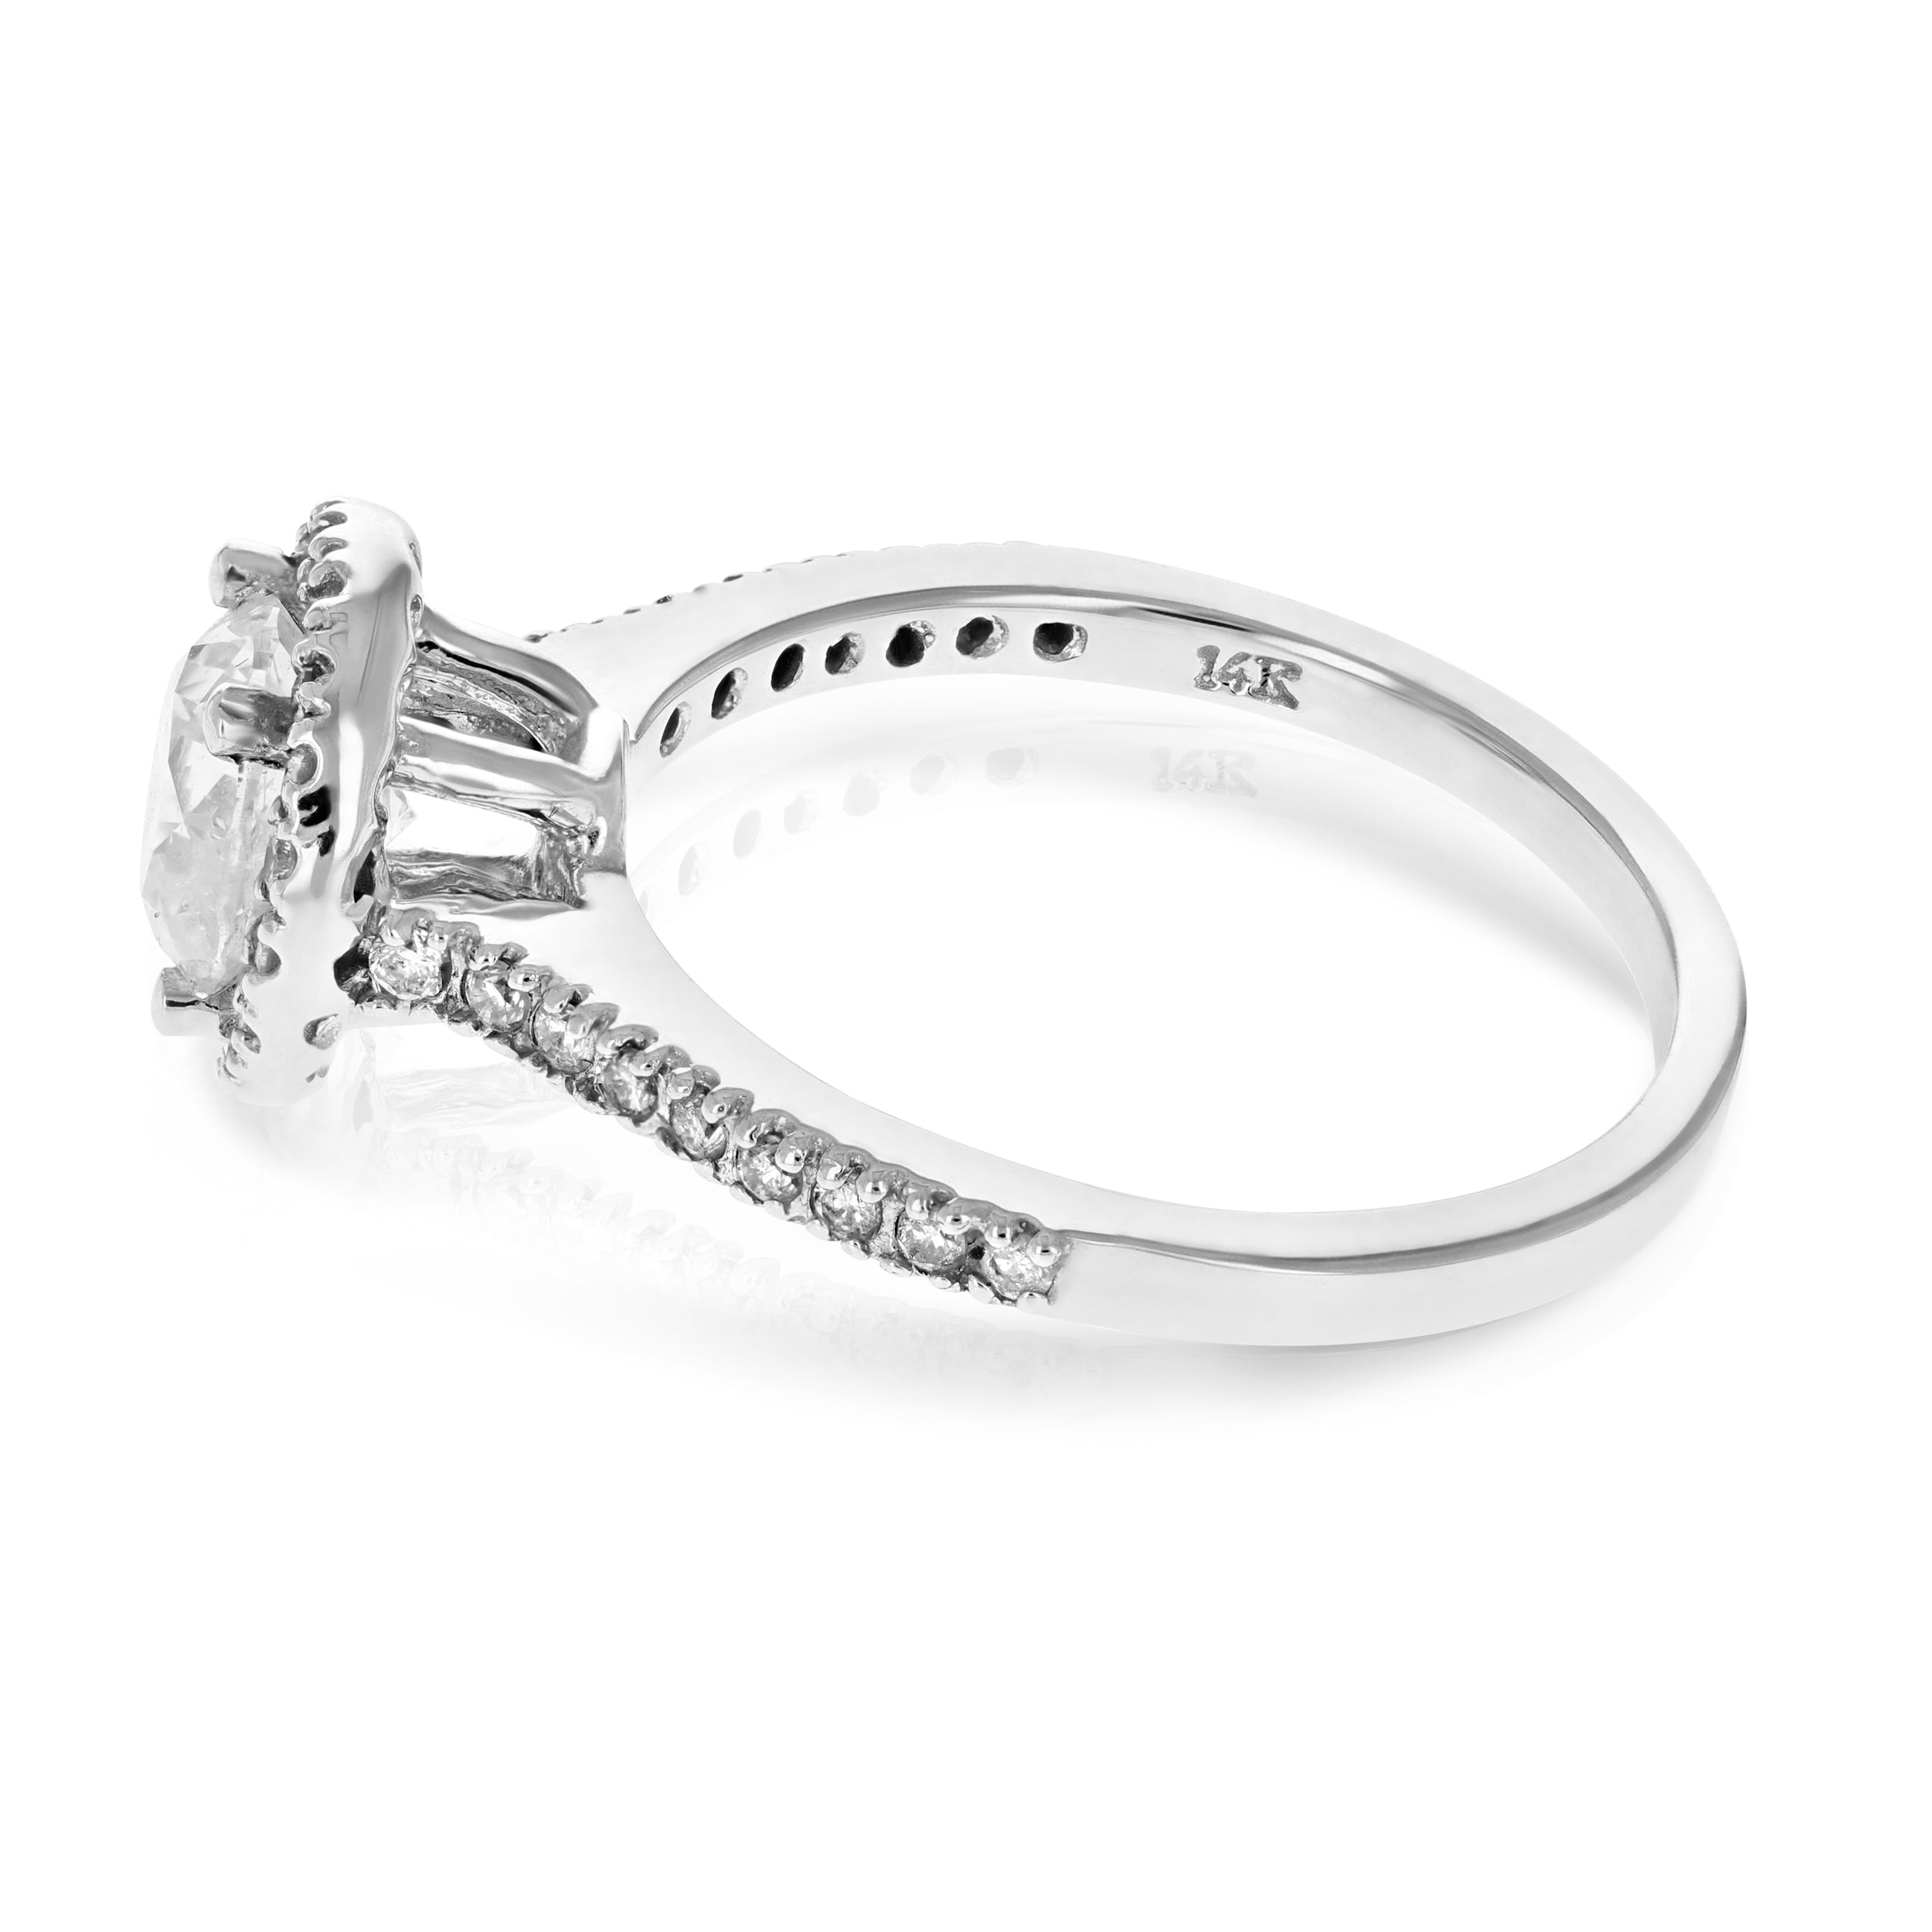 French Pave Diamond Engagement Ring